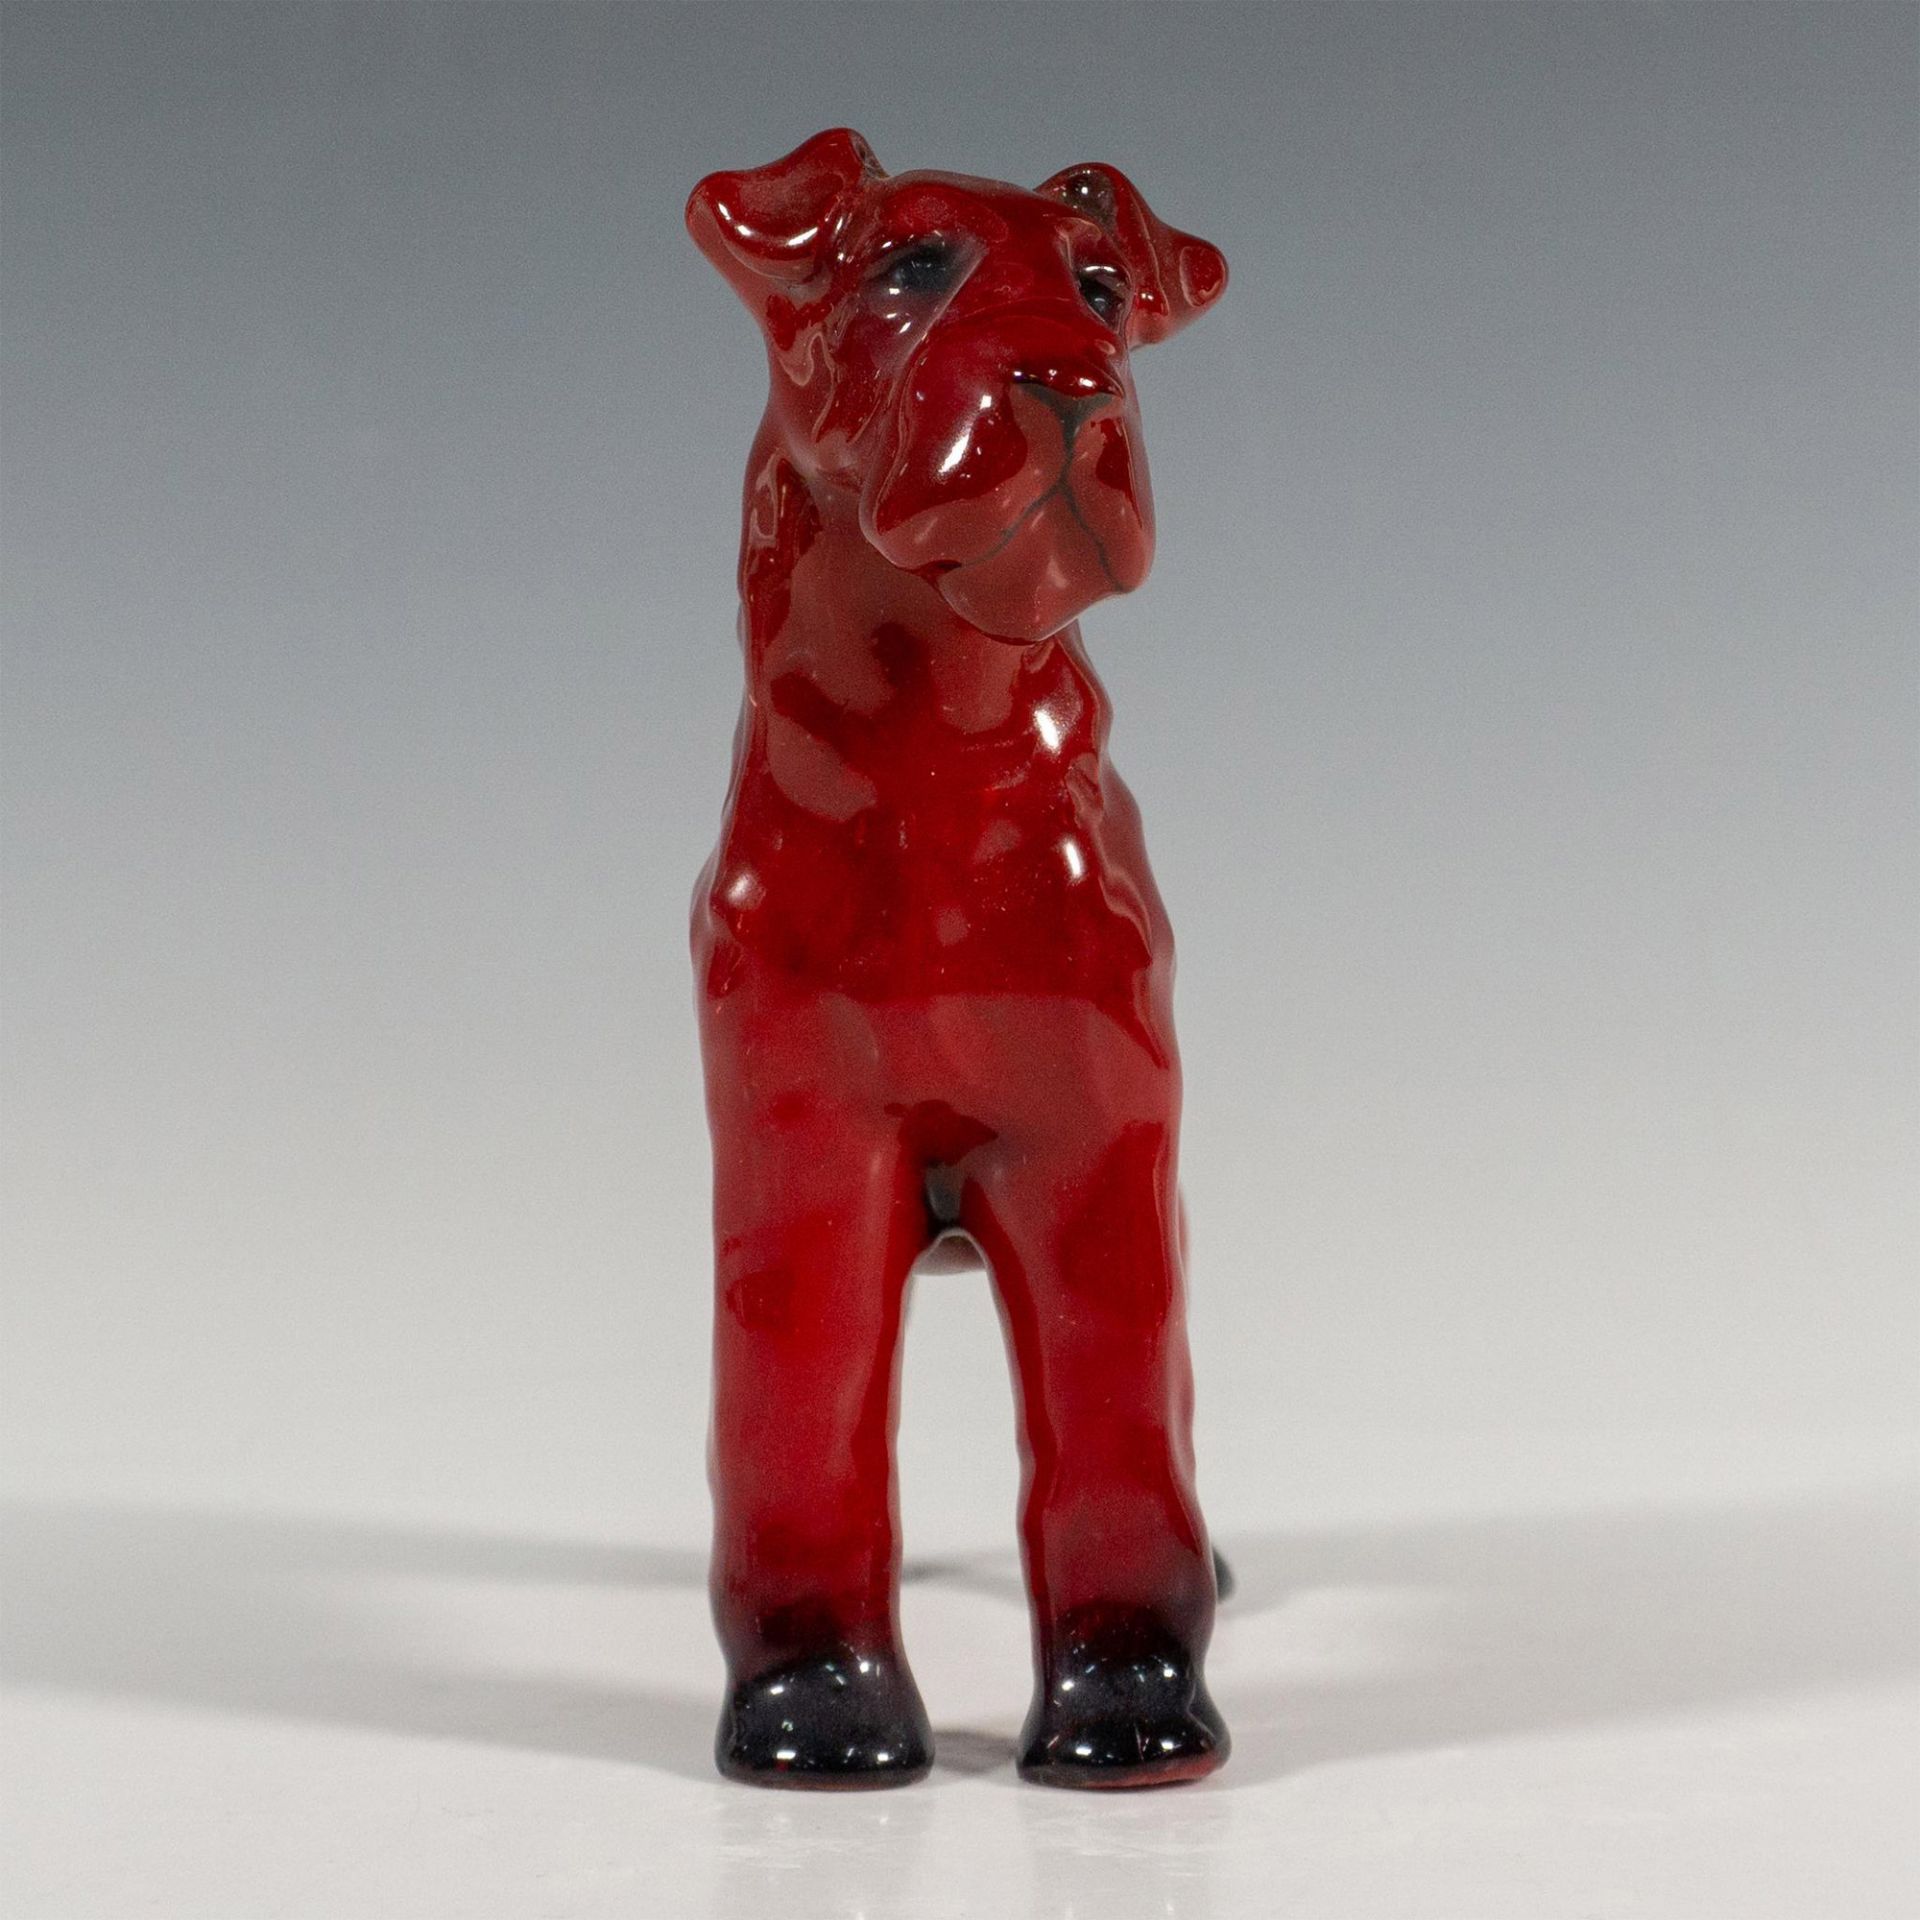 Royal Doulton Flambe Figurine, Airedale Terrier HN1023 - Image 3 of 5